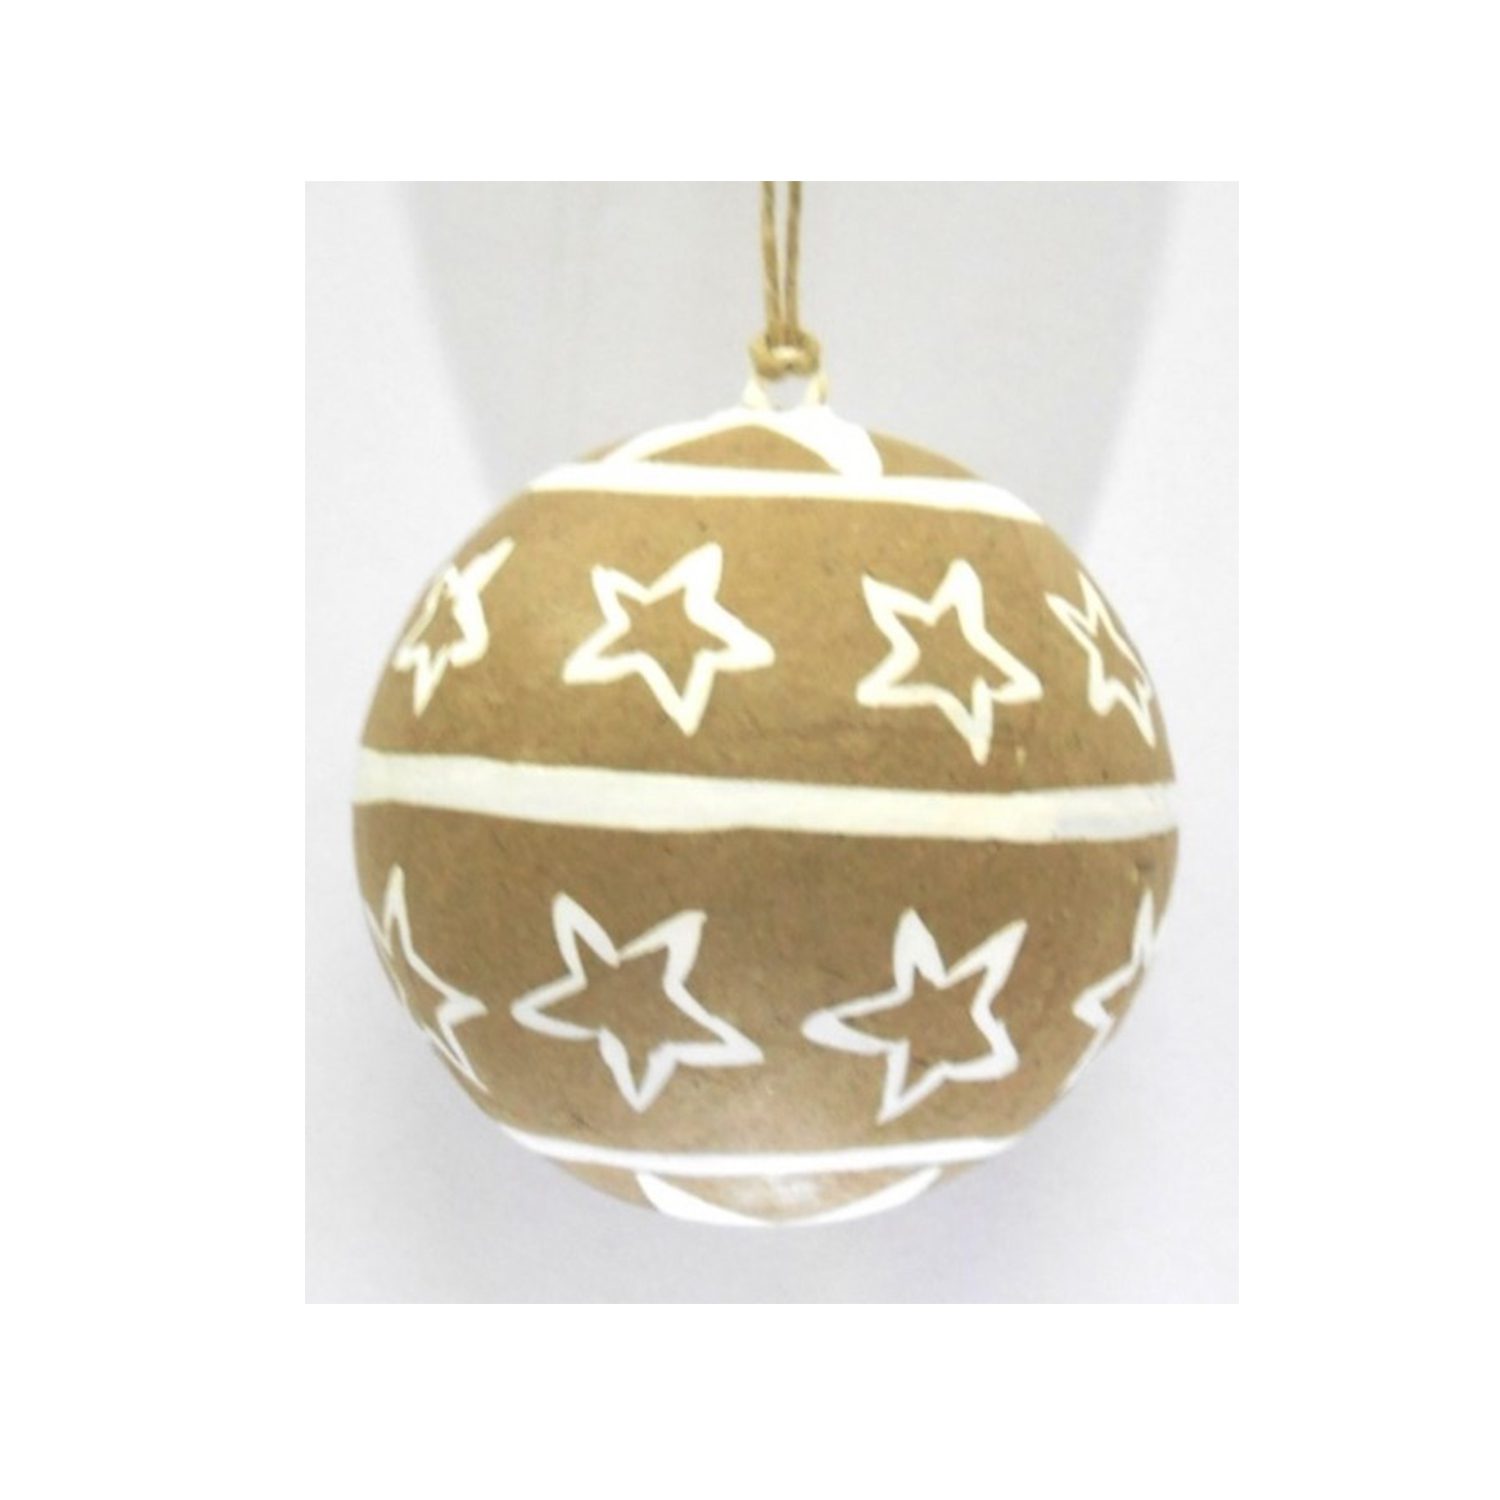 Starry Christmas Tree Decoration,Gold and White